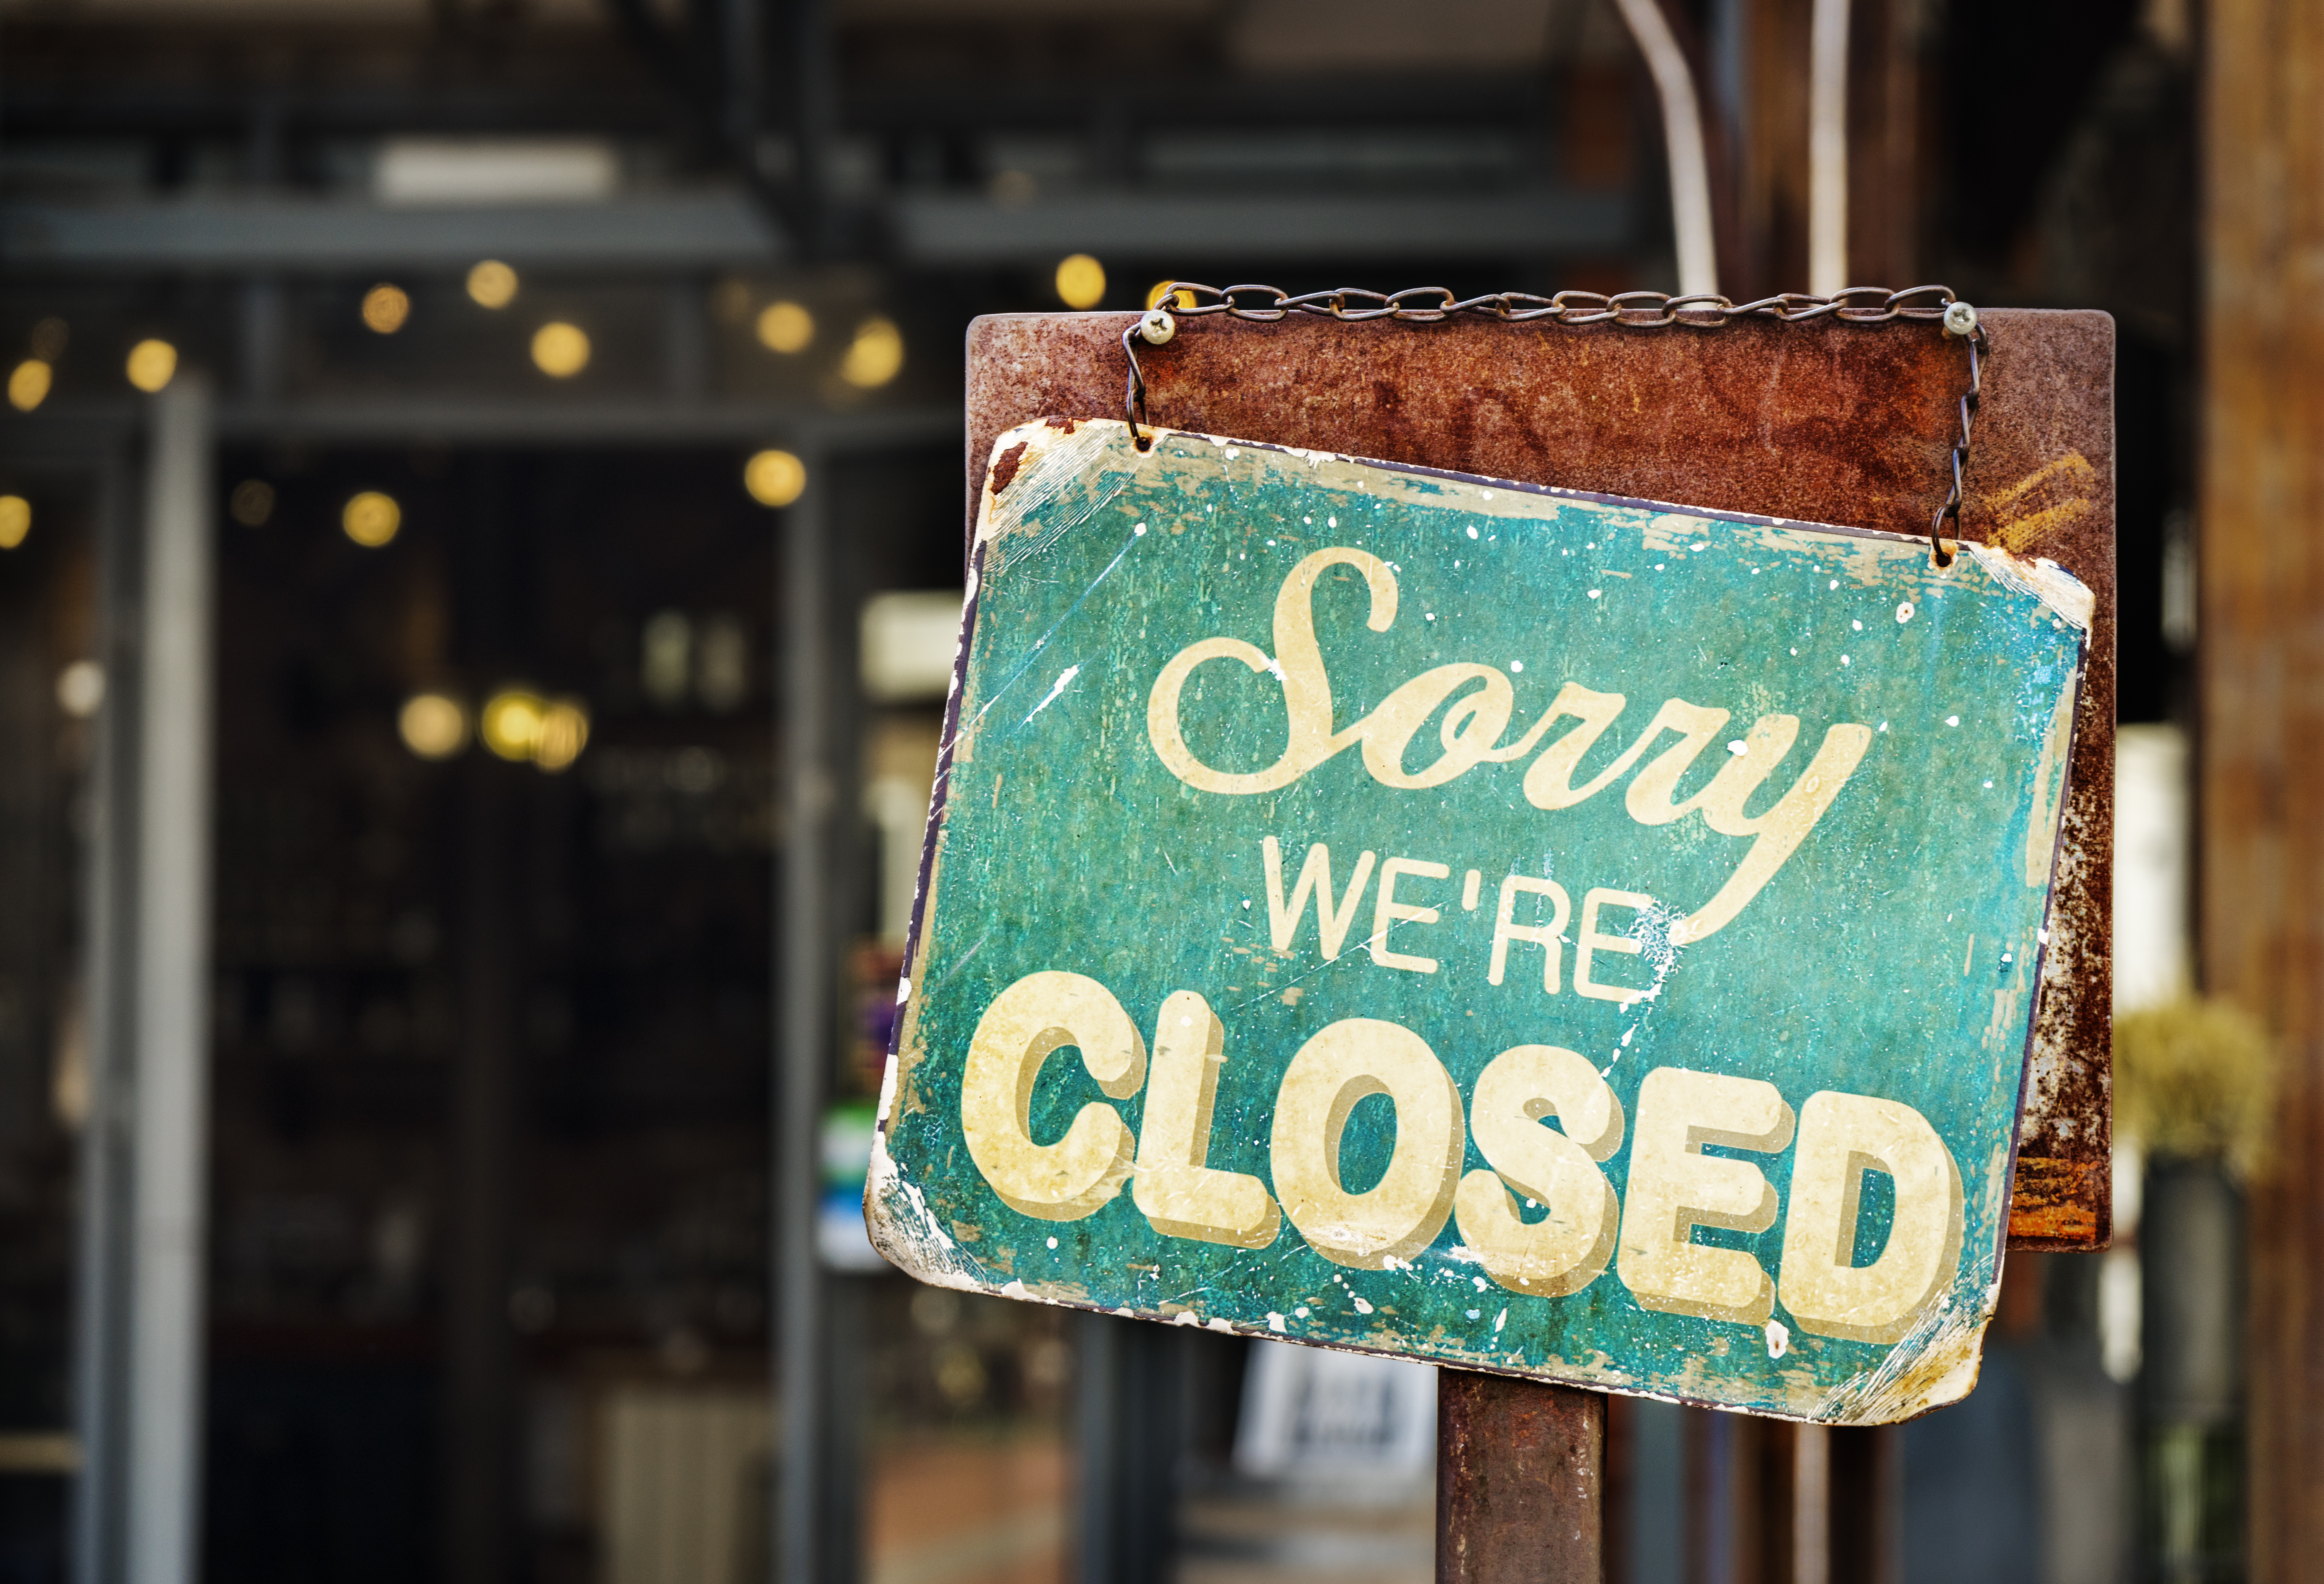 A “Sorry, we’re closed” sign.